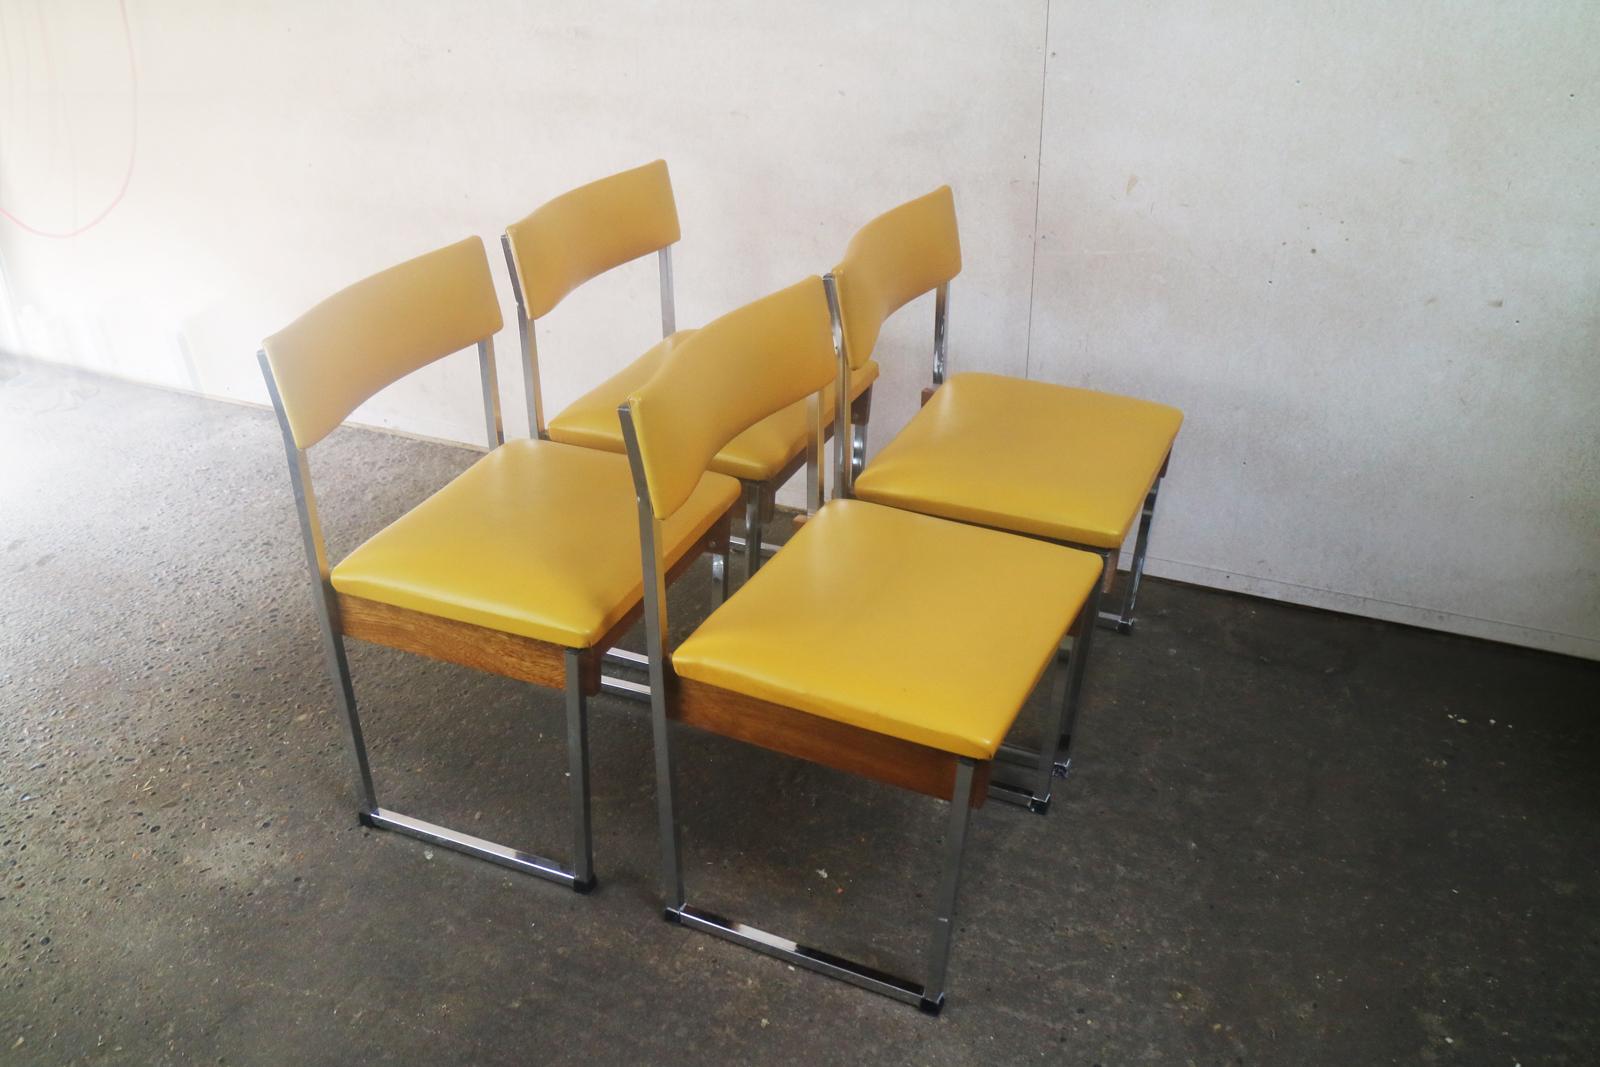 Matching set of 1970s midcentury chairs made in Germany. For dining or office use.